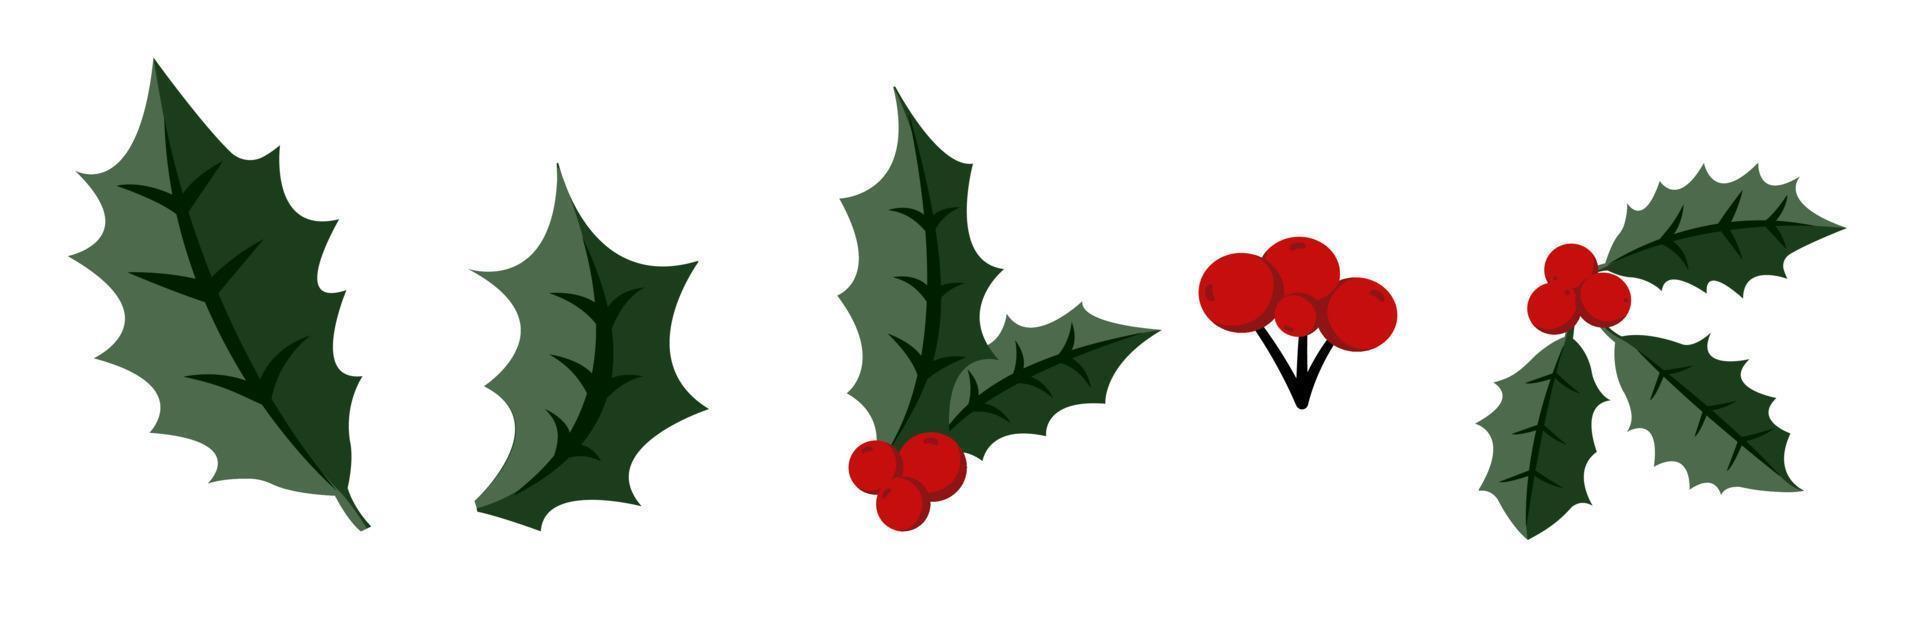 Christmas Holly Specie Twig with Red Berries and Tree Needle Branch vector